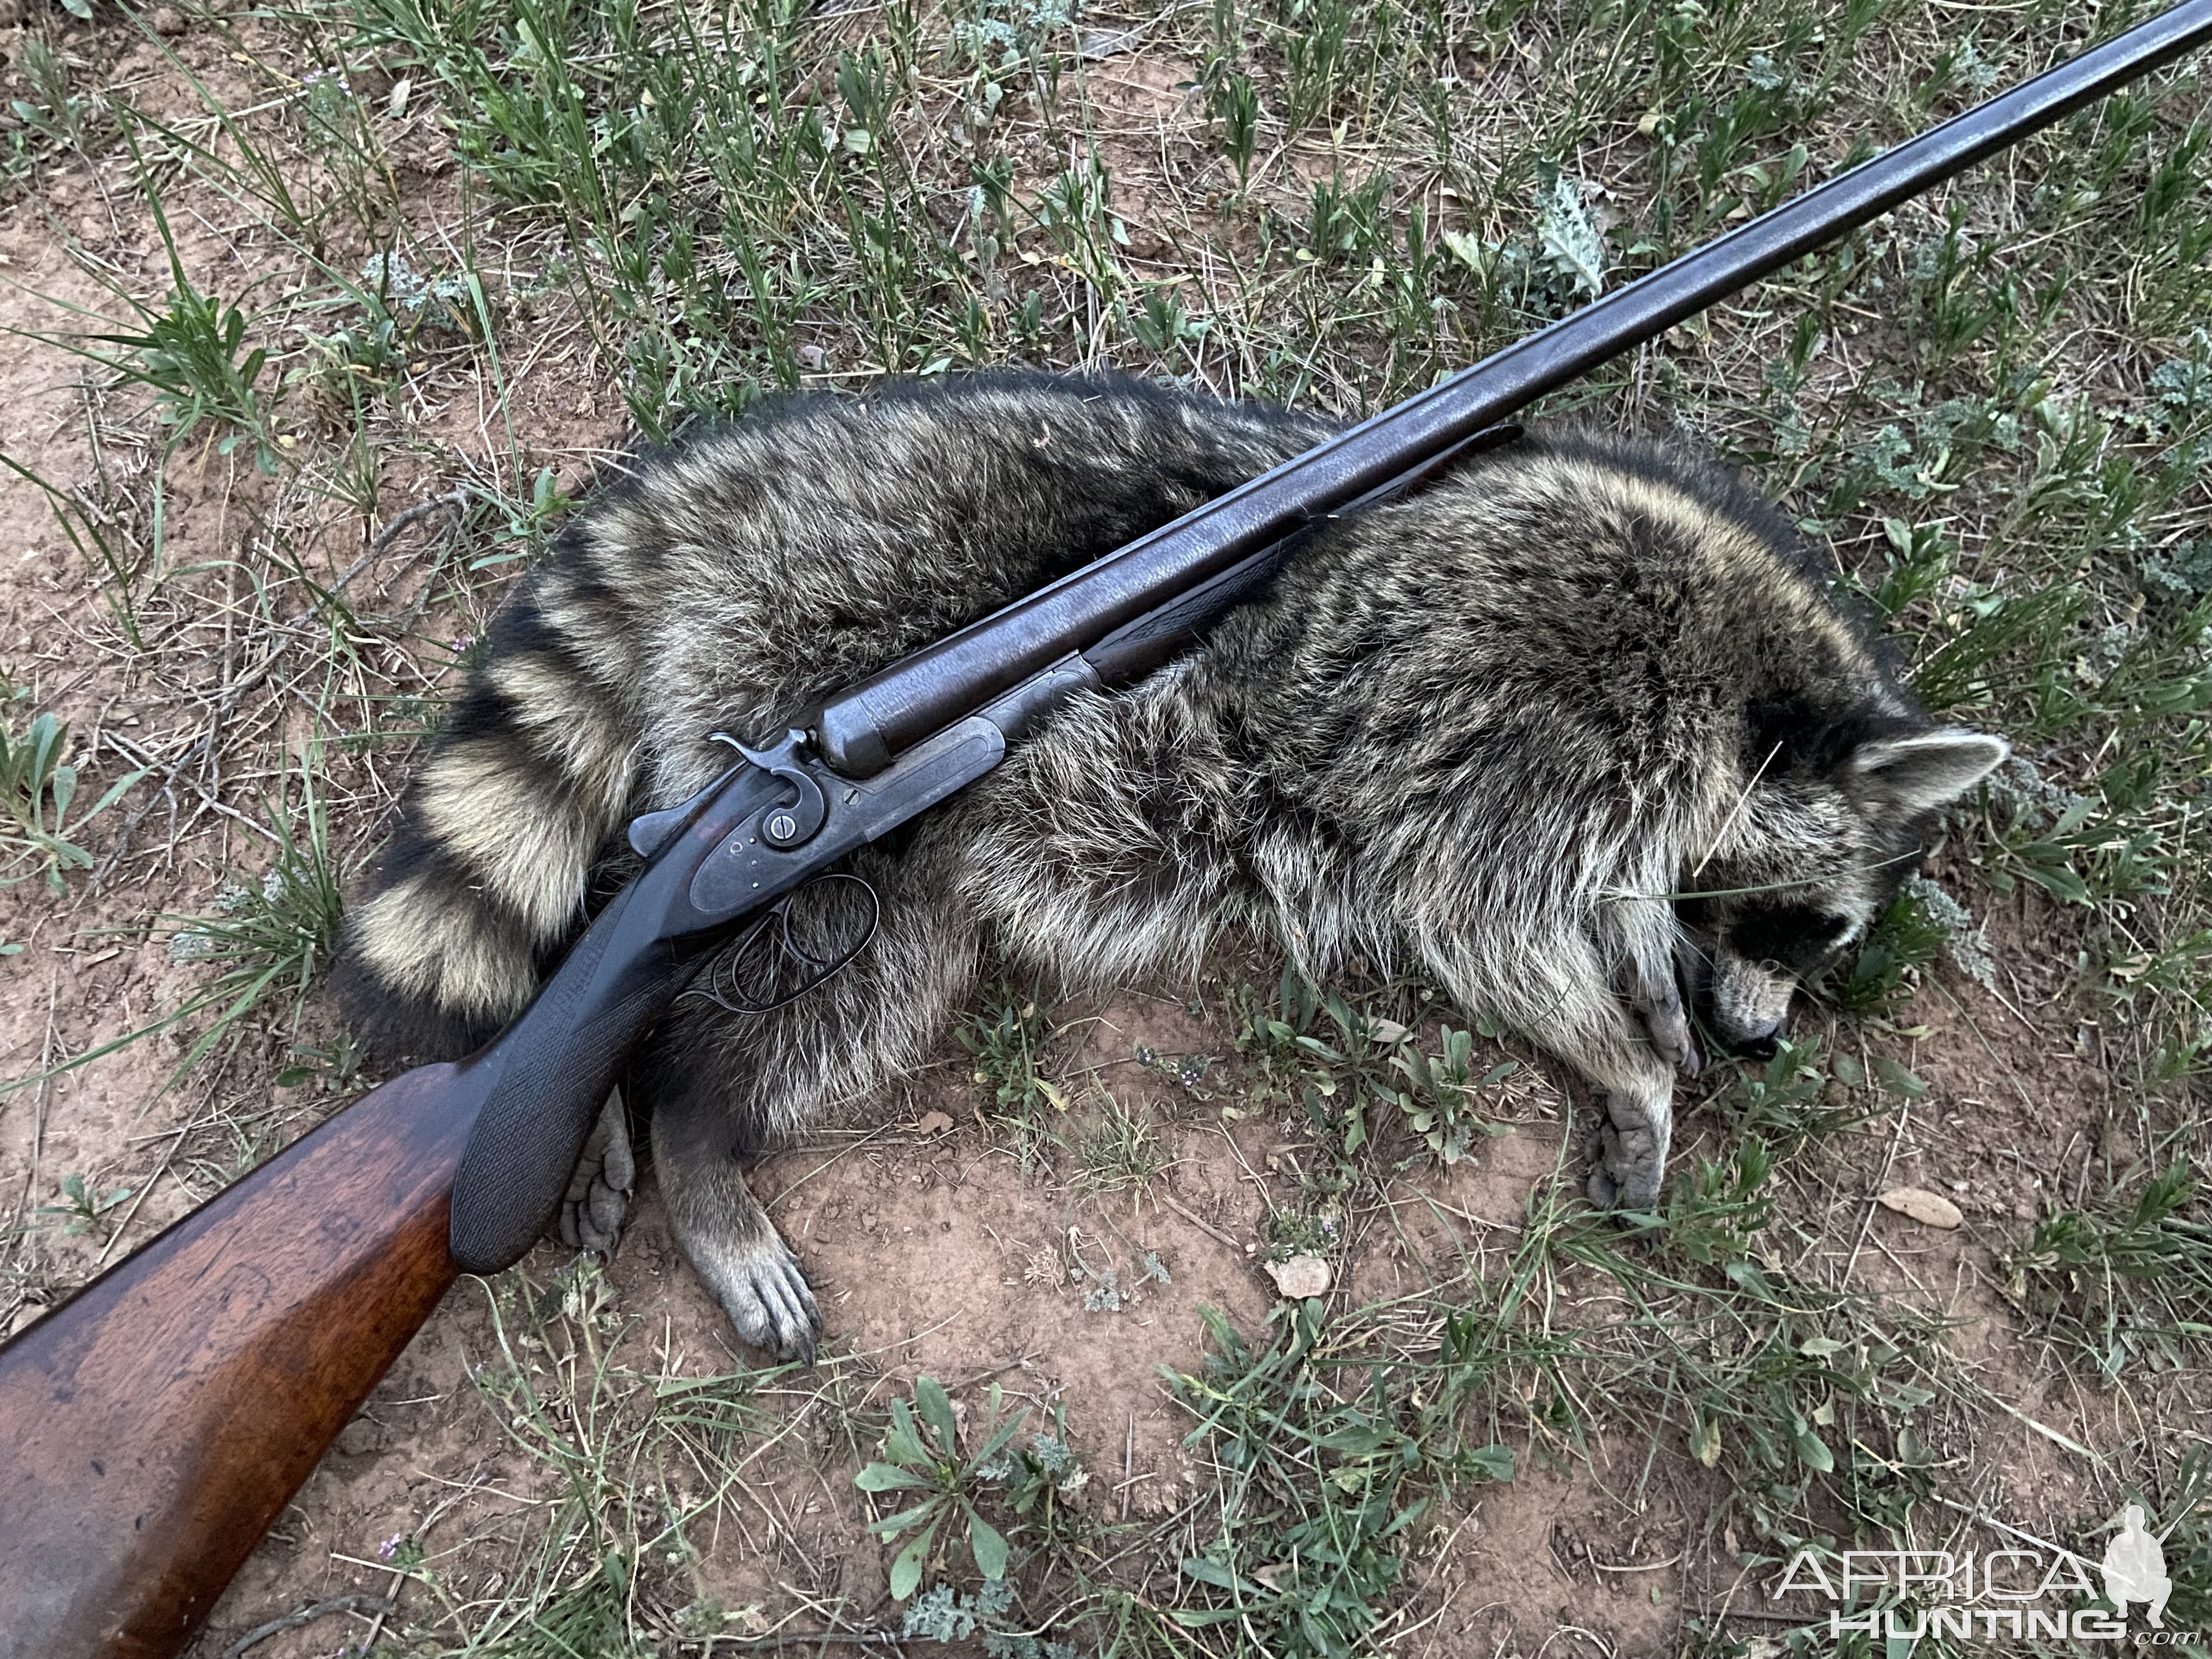 128 Year Old Hunting Rifle